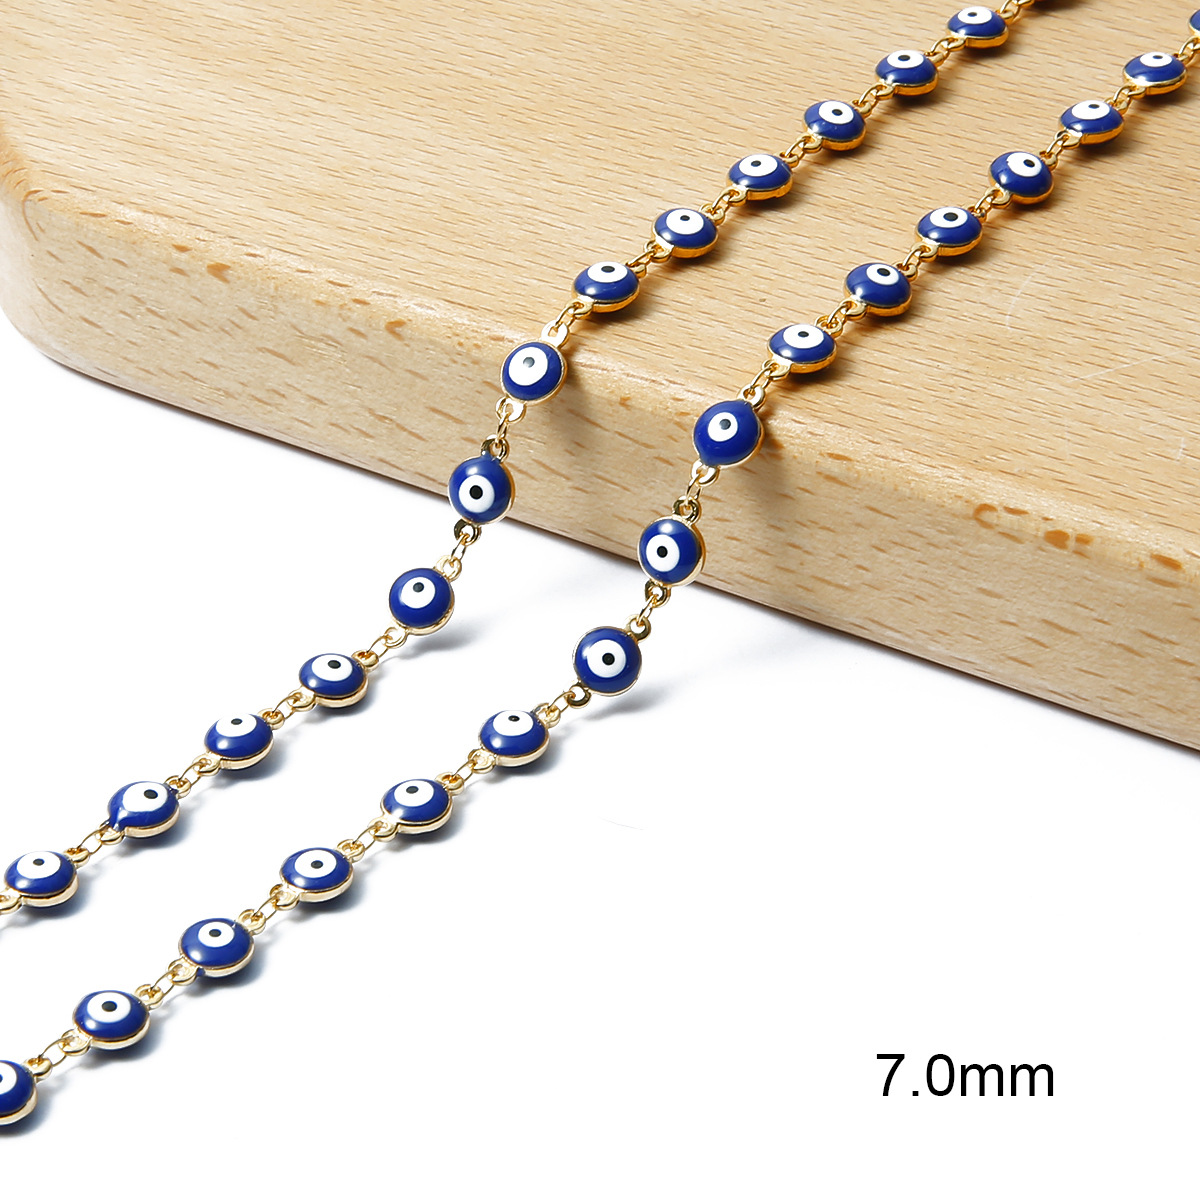 2:5mm oil drop chain/mixed color eyes /50cm/ strip